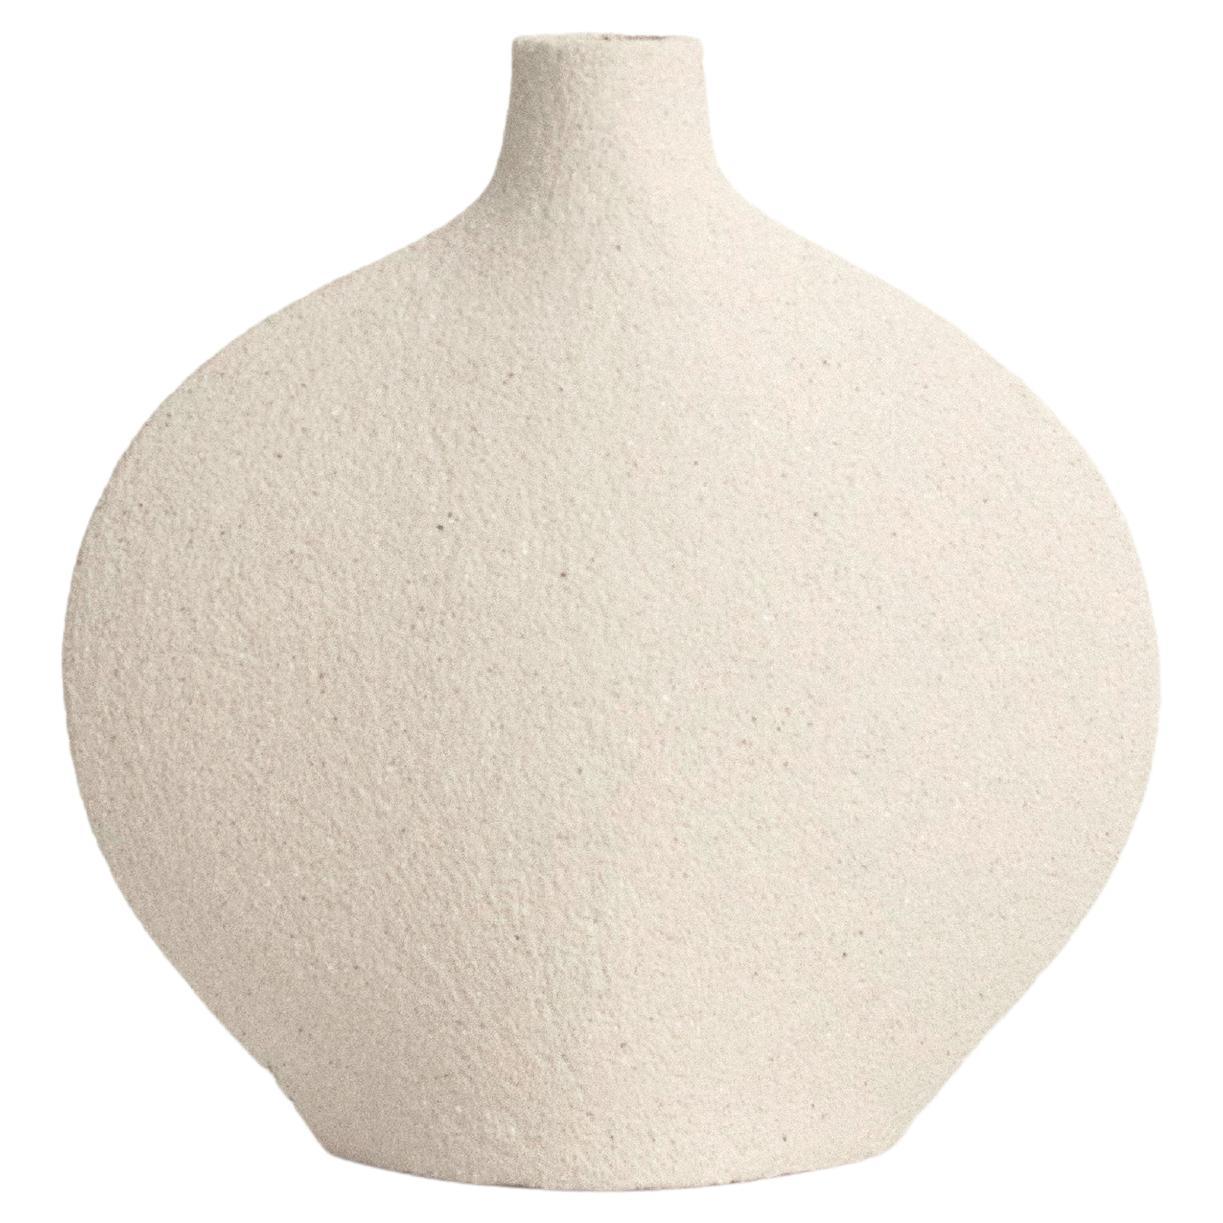 21st Century Goutte Vase in White Ceramic, Hand-Crafted in France For Sale